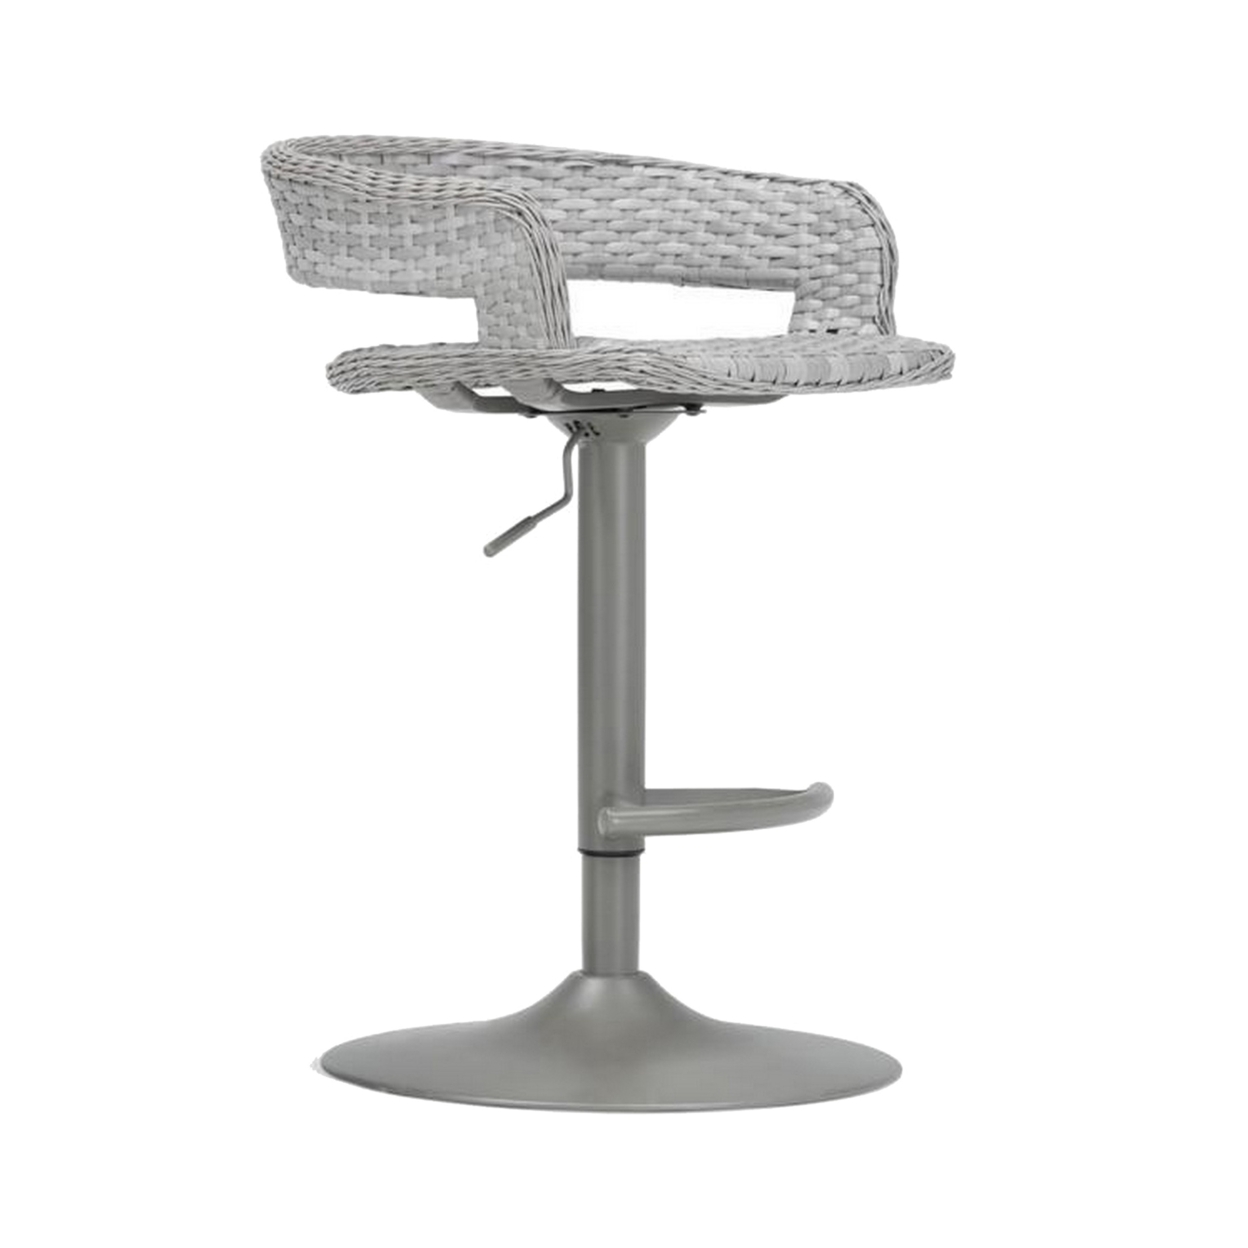 Coco 30 Inch Set Of 2 Patio Airlift Bar Stools With Wicker Frame, Gray- Saltoro Sherpi